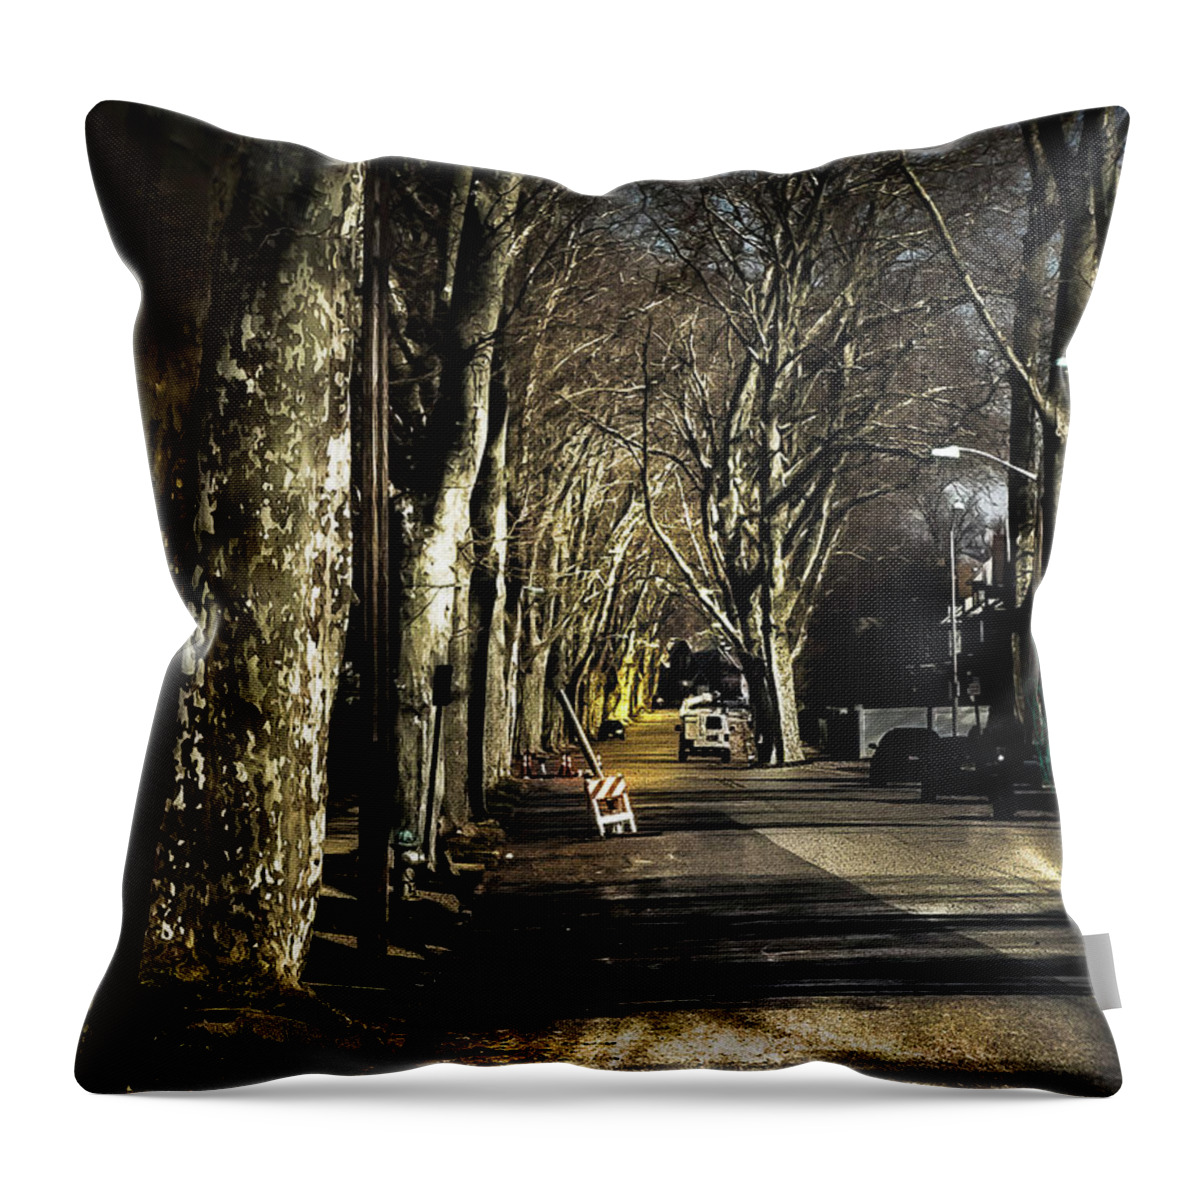 Roosevelt Throw Pillow featuring the photograph Roosevelt Avenue II by Leon deVose